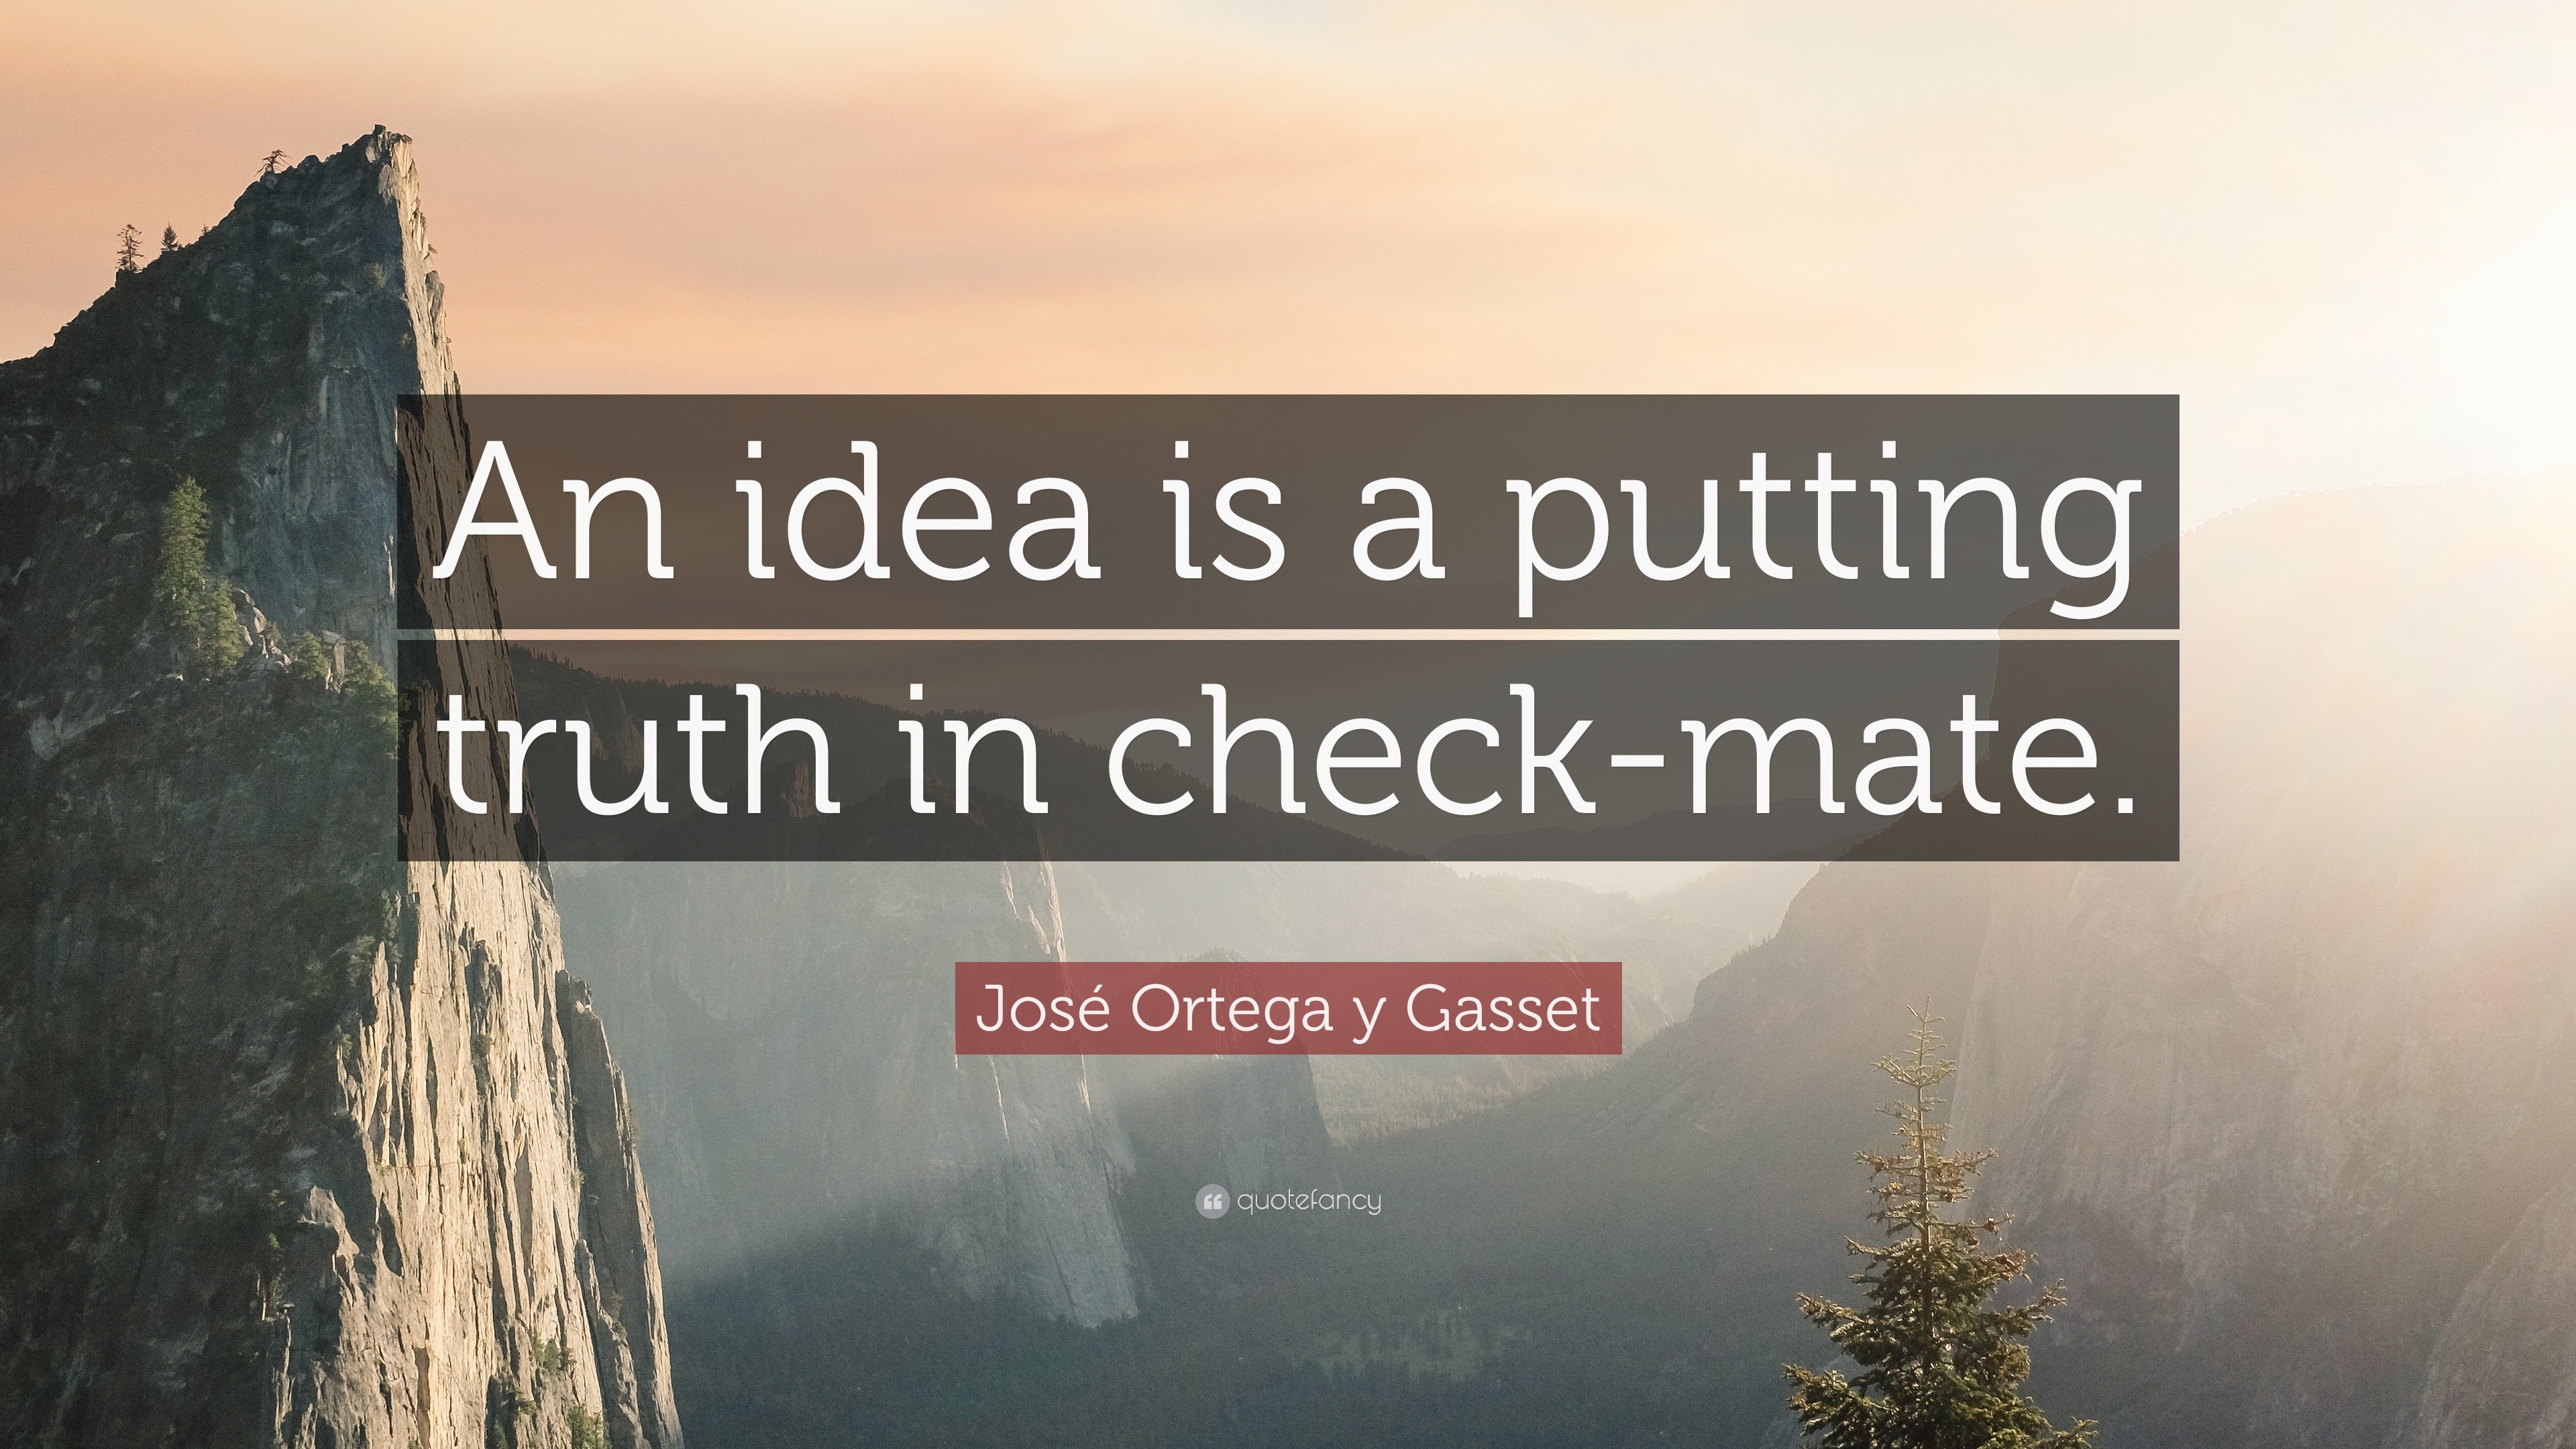 https://quotefancy.com/media/wallpaper/3840x2160/635937-Jos-Ortega-y-Gasset-Quote-An-idea-is-a-putting-truth-in-check-mate.jpg